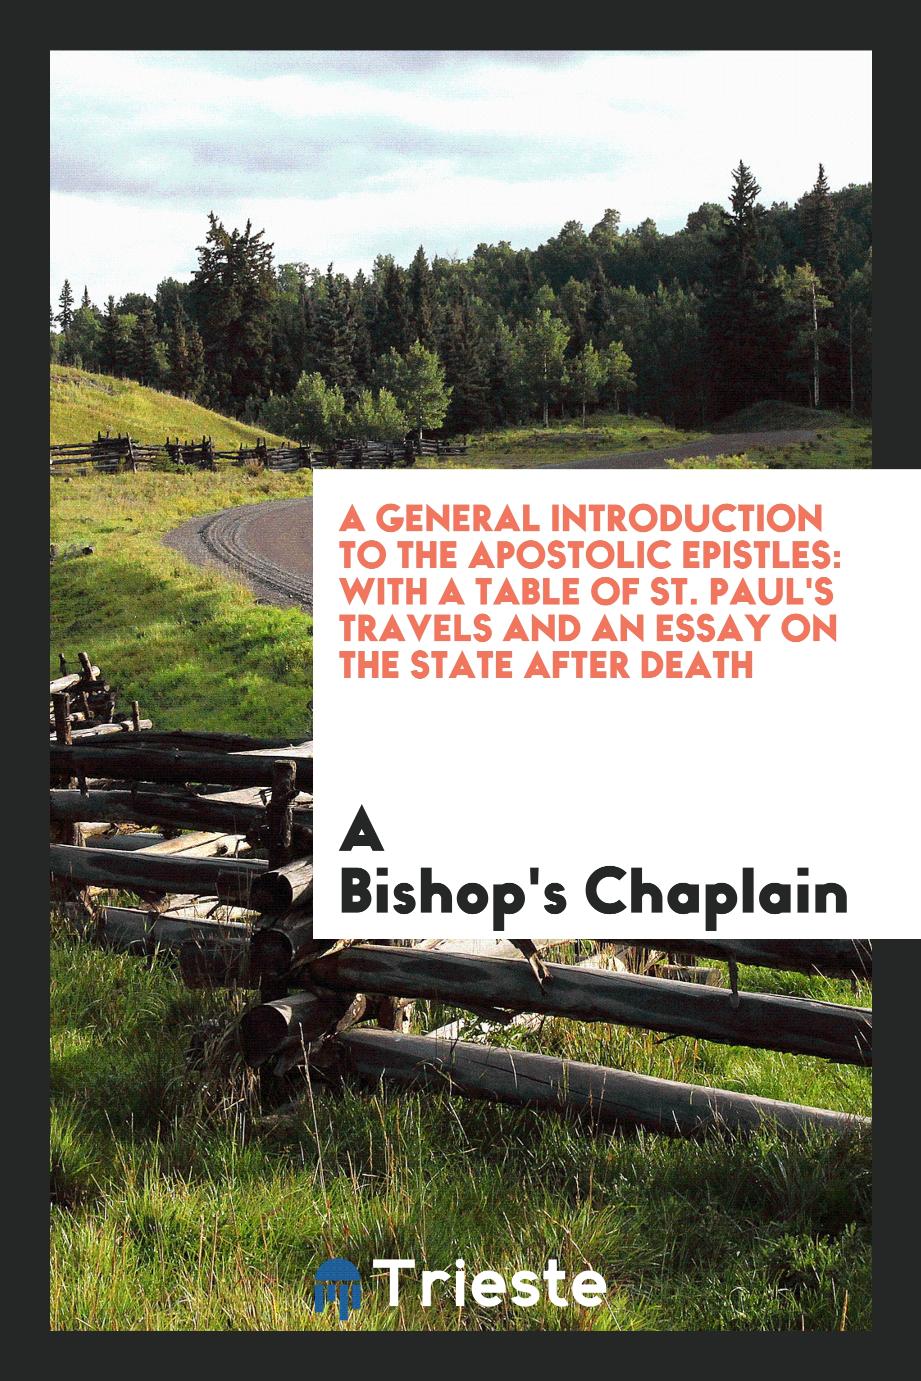 A General Introduction to the Apostolic Epistles: With a Table of St. Paul's Travels and an Essay on the State after Death